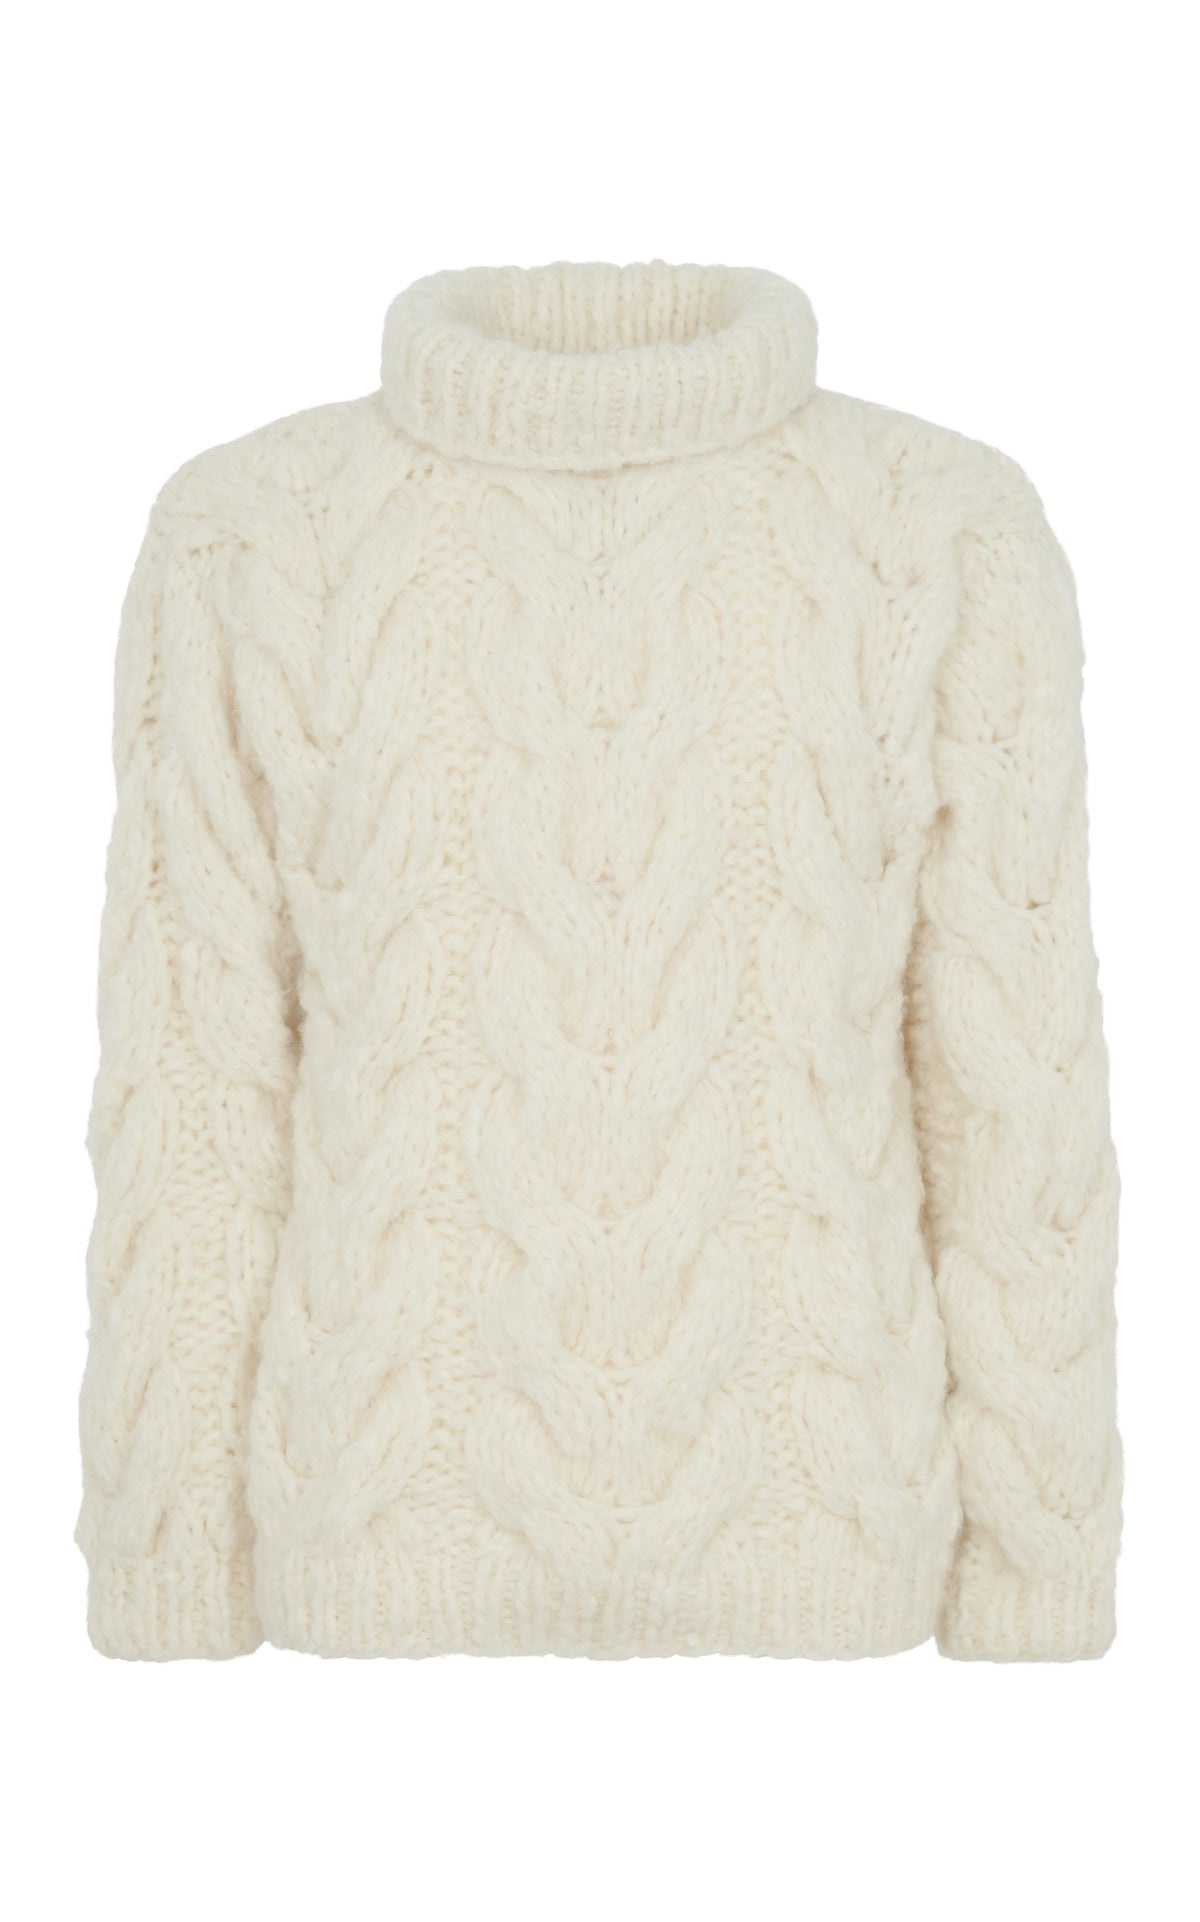 Ray Knit Sweater in Ivory Welfat Cashmere - 1